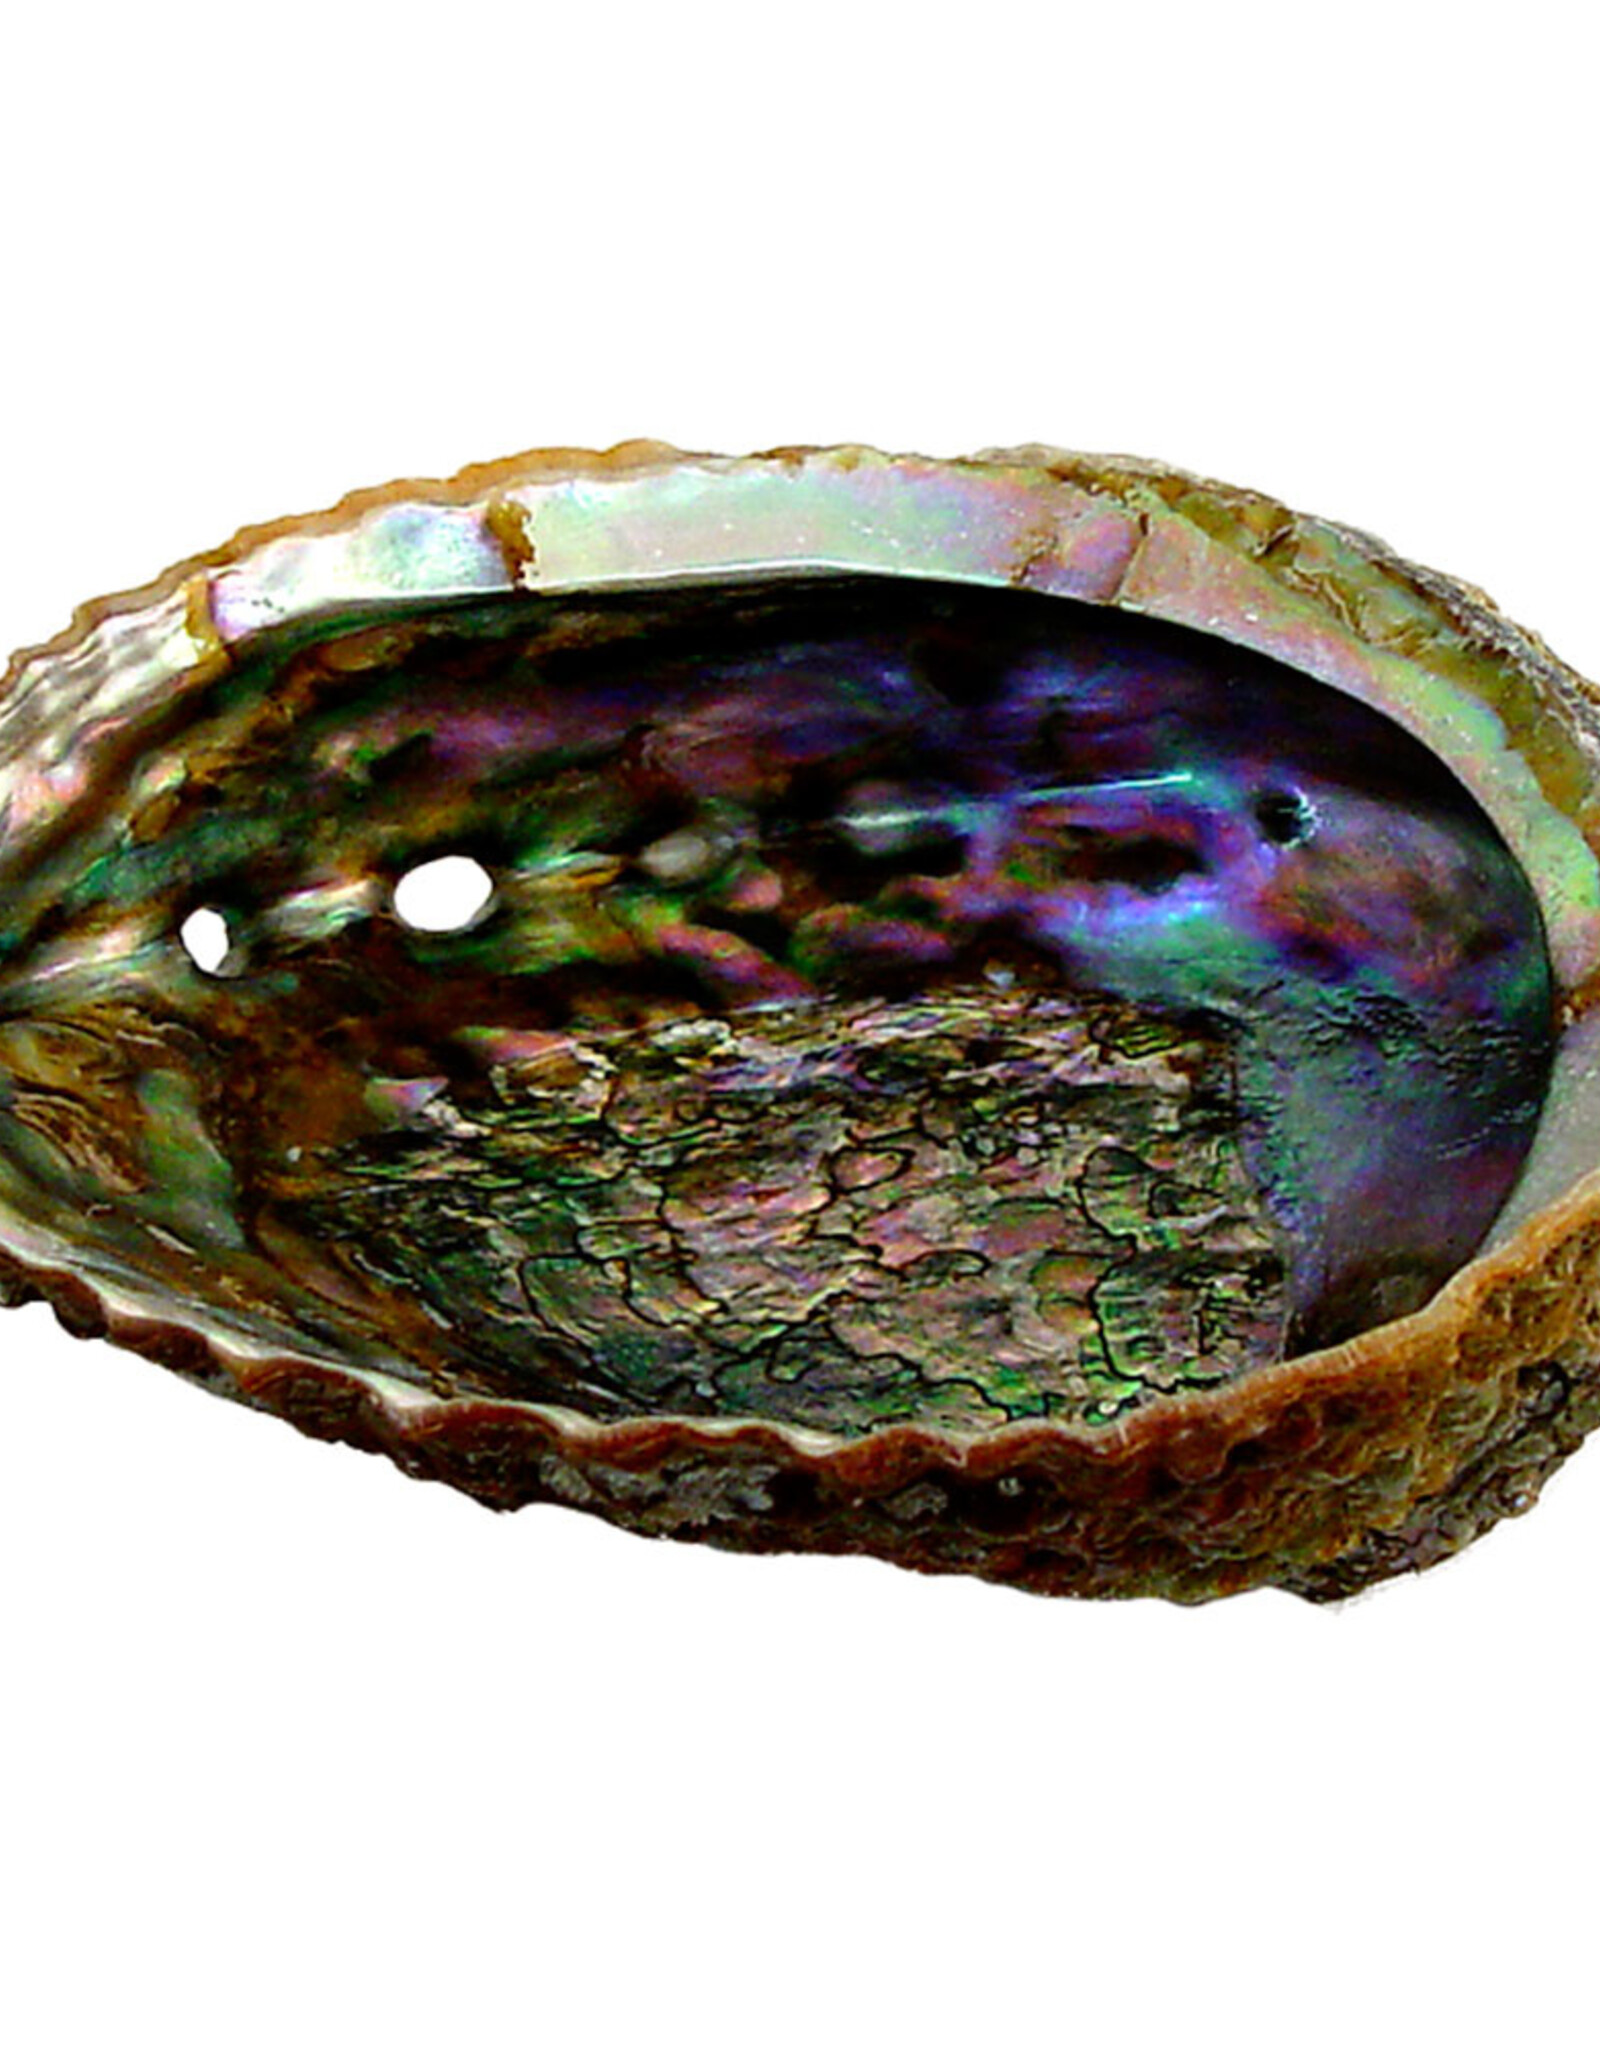 SMUDGING-ABALONE SHELL (ASSORTED SIZE) 4″-6.5″